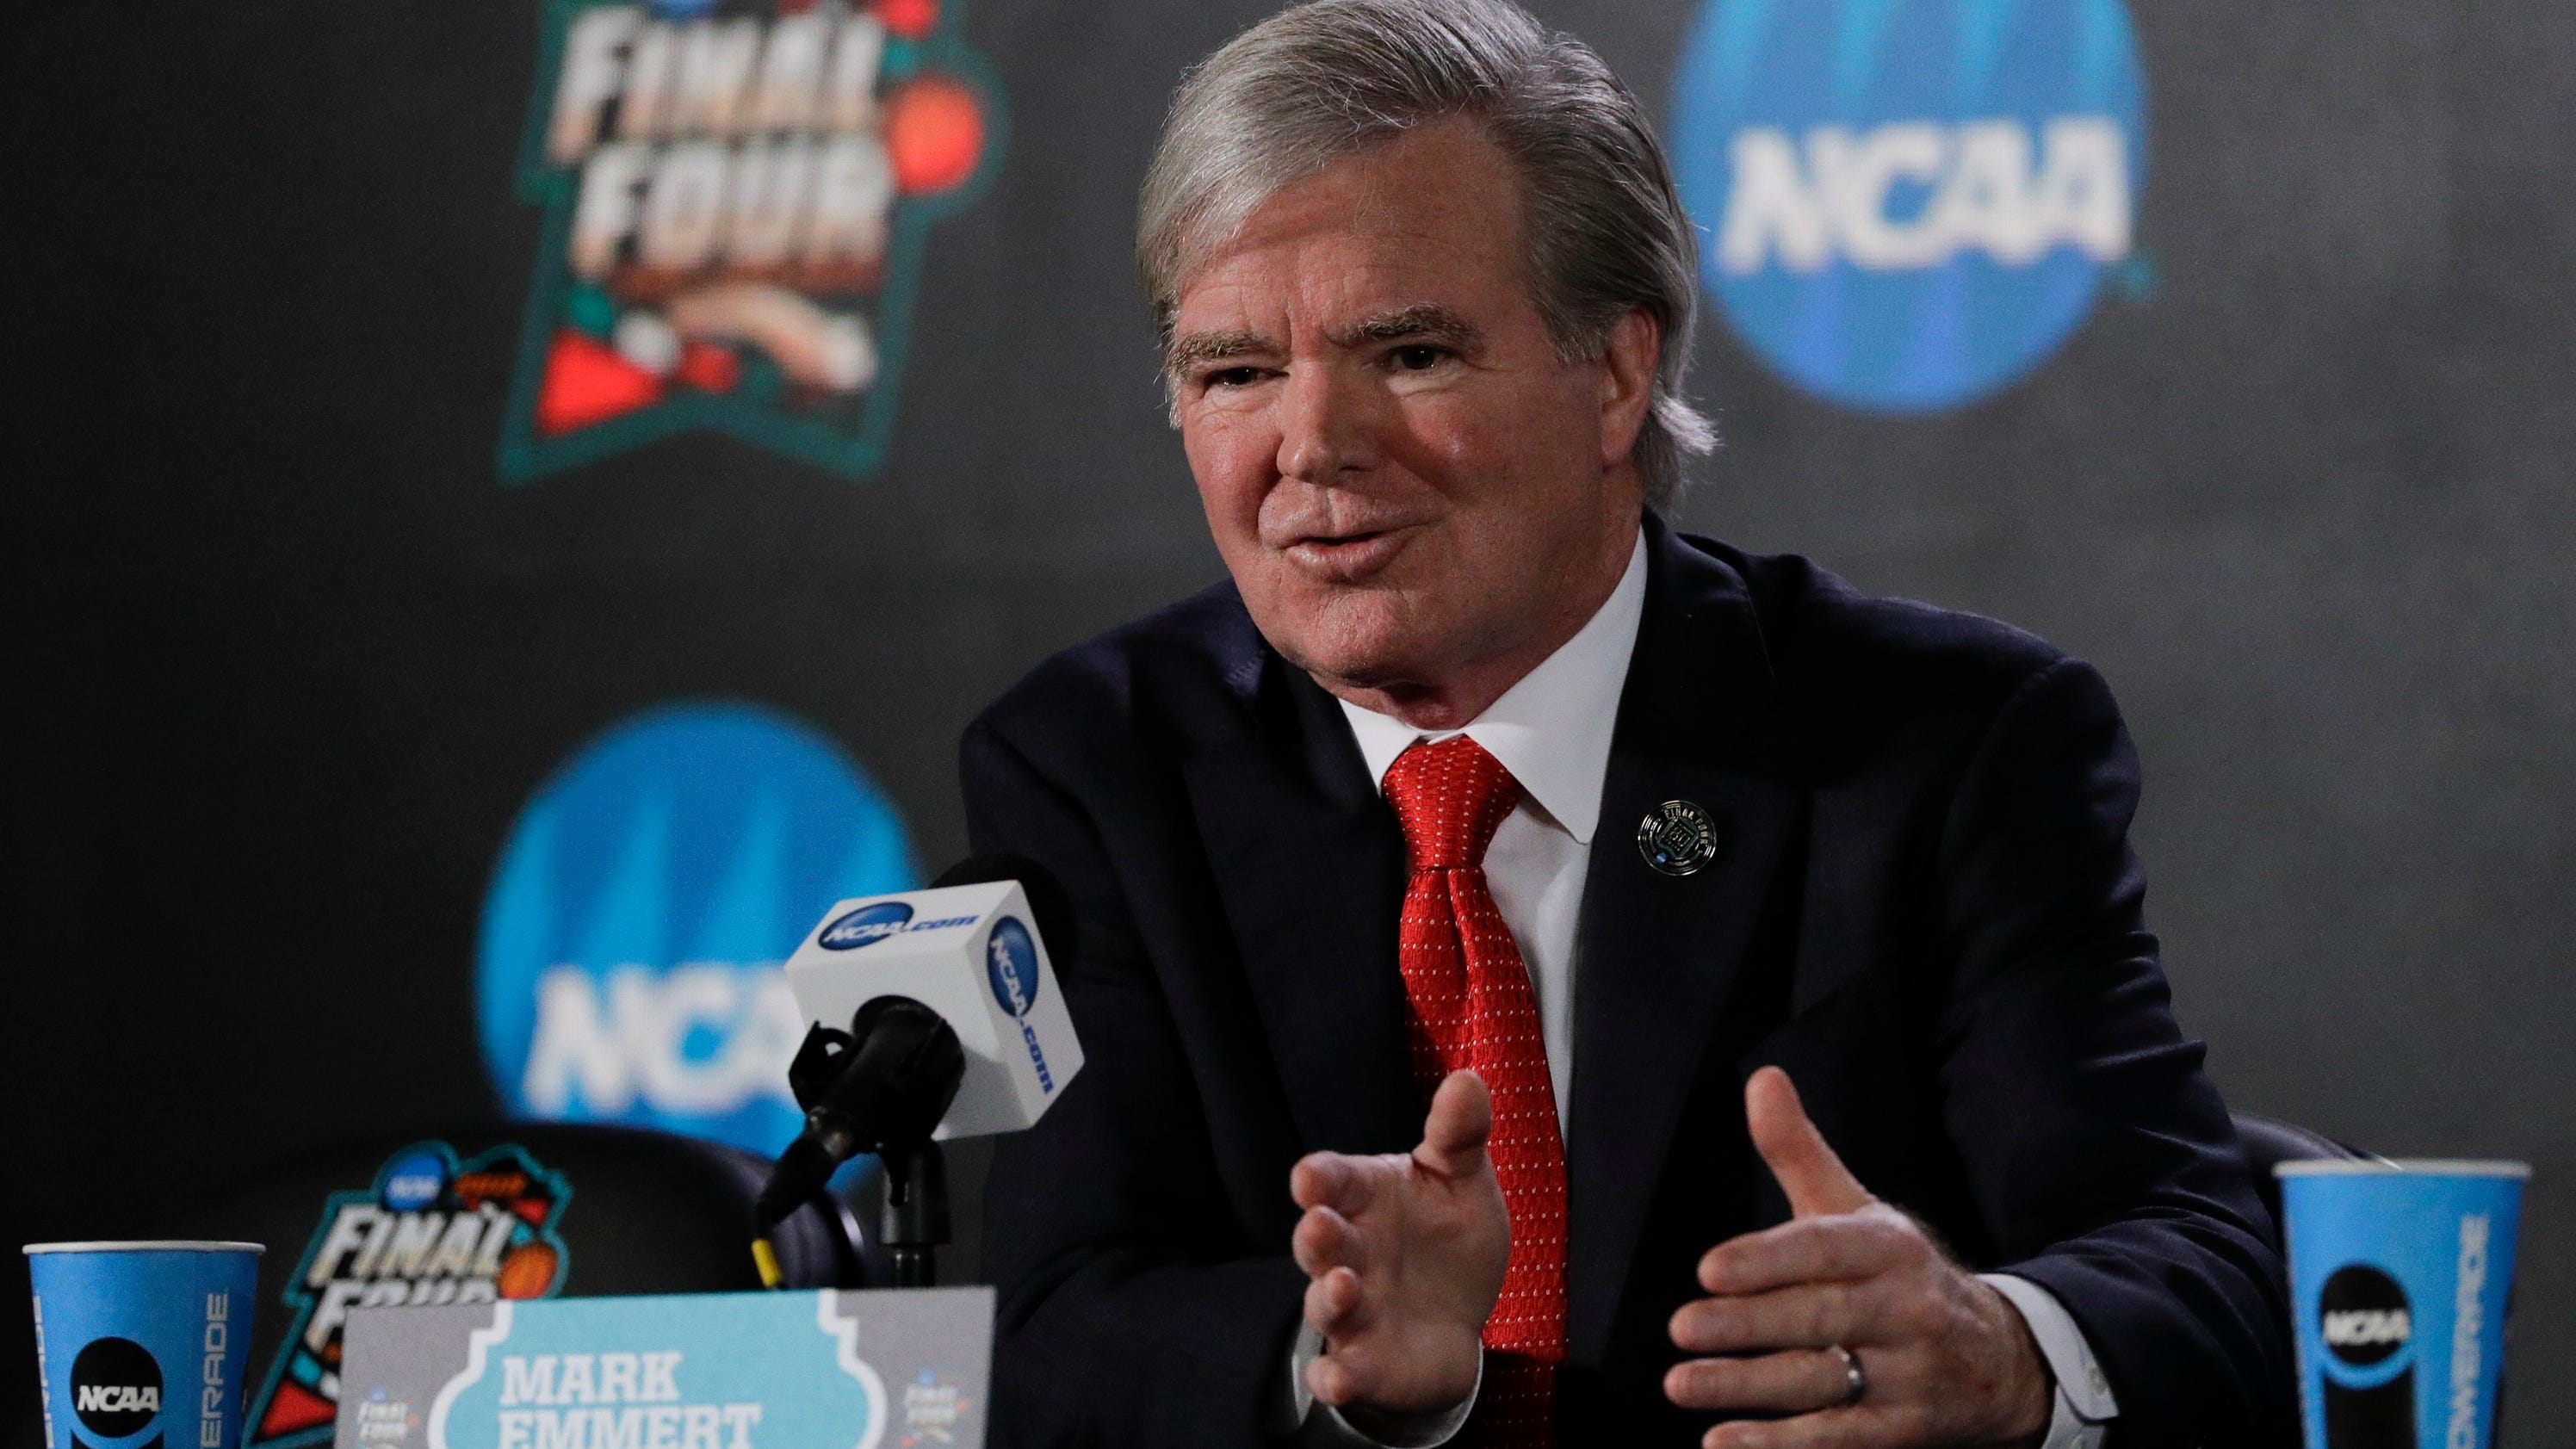 NCAA's Mark Emmert: Basketball players shouldn't feel forced into college